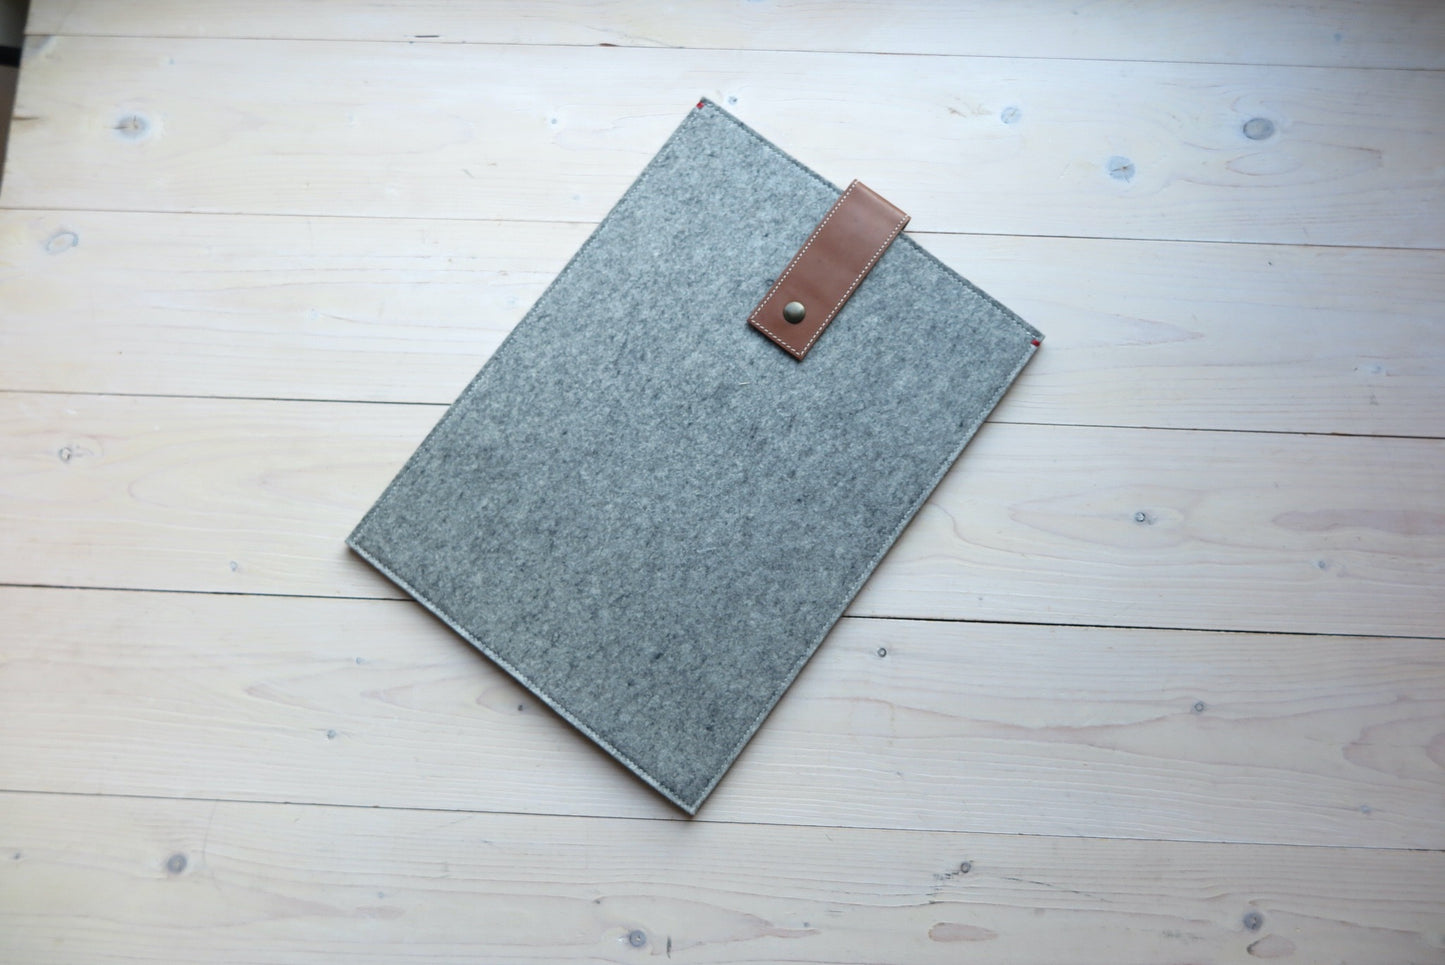 Felt cover with leather closure for MS Surface Pro 7 with type cover